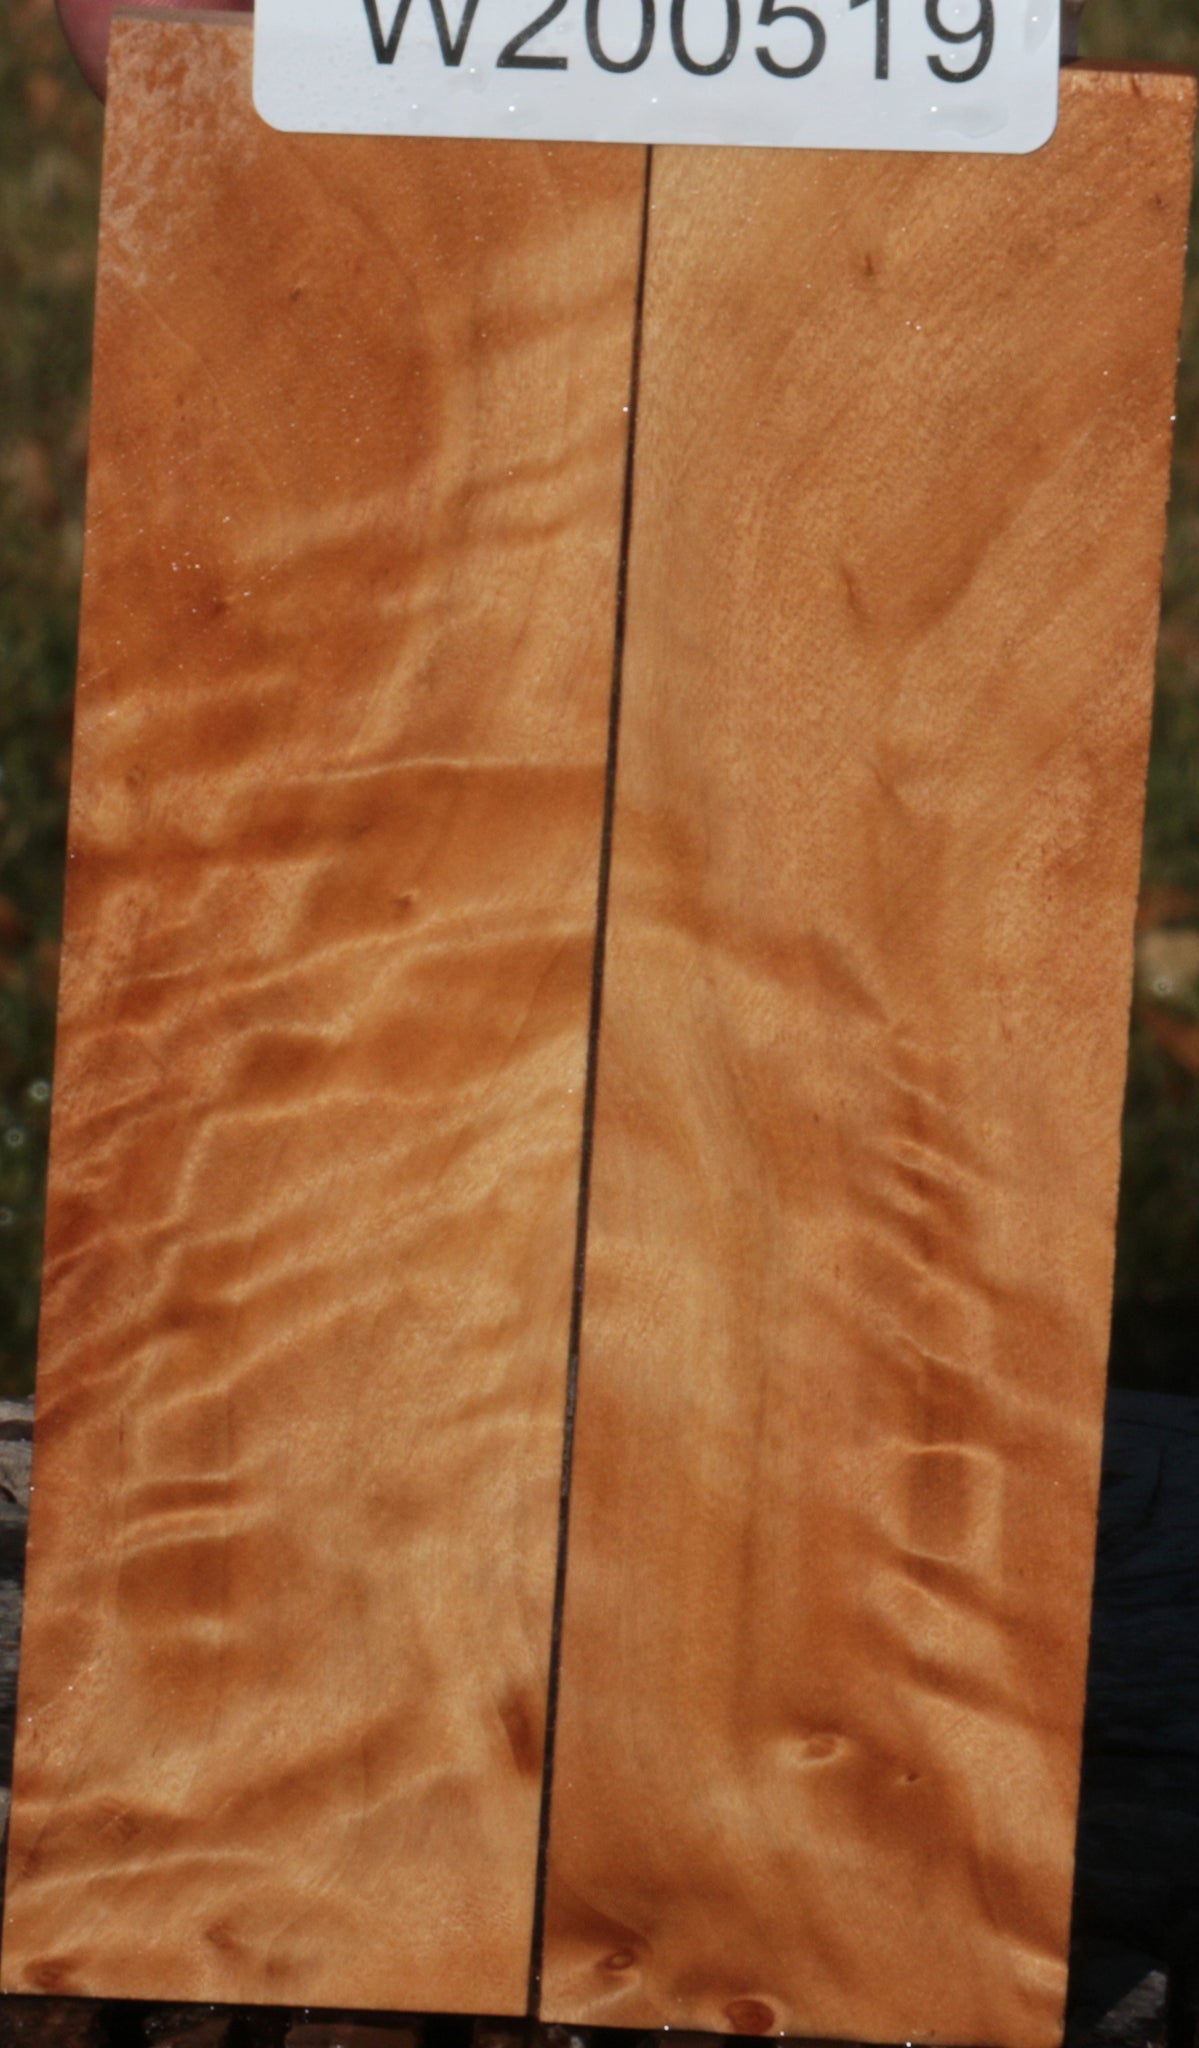 California Cottonwood Burl Bookmatched Knife Scales